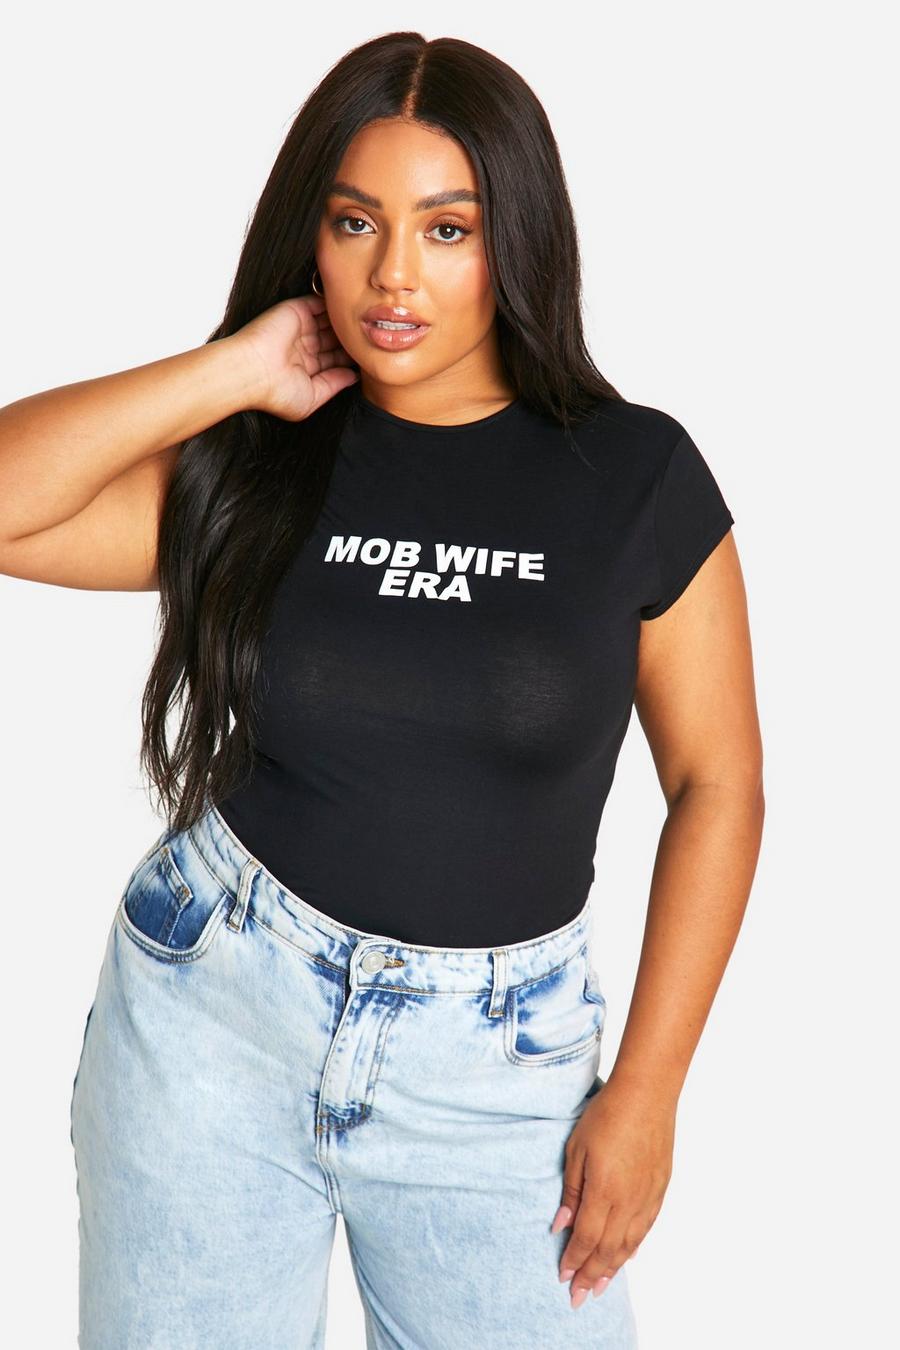 T-shirt Plus Size per neonato Mob Wife, Black image number 1